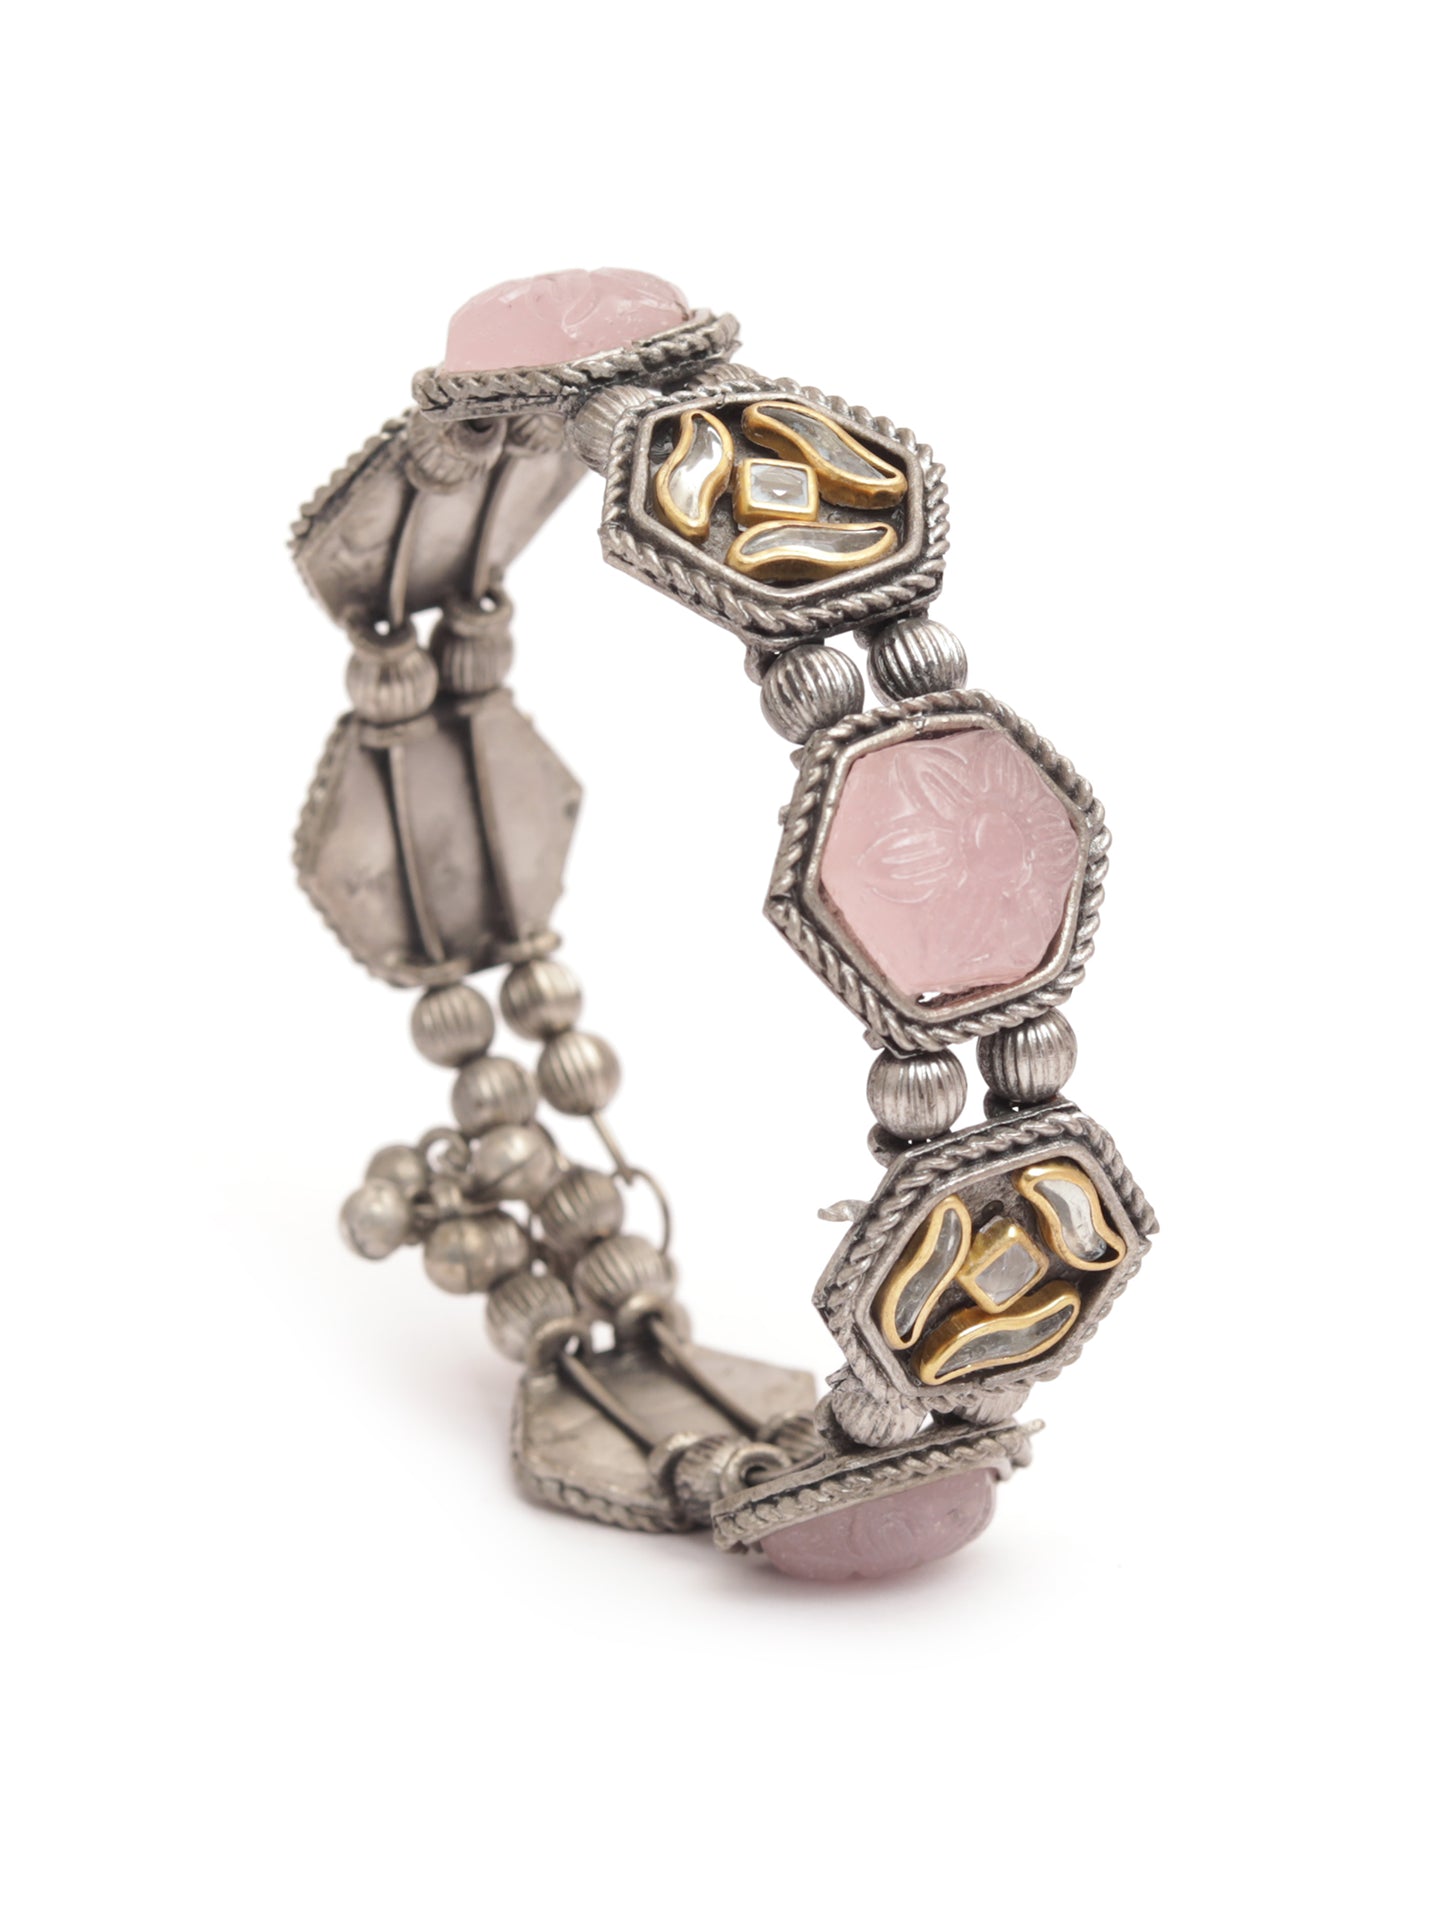 The Sassy Kundan Biscuit Bracelet with Pink Stone